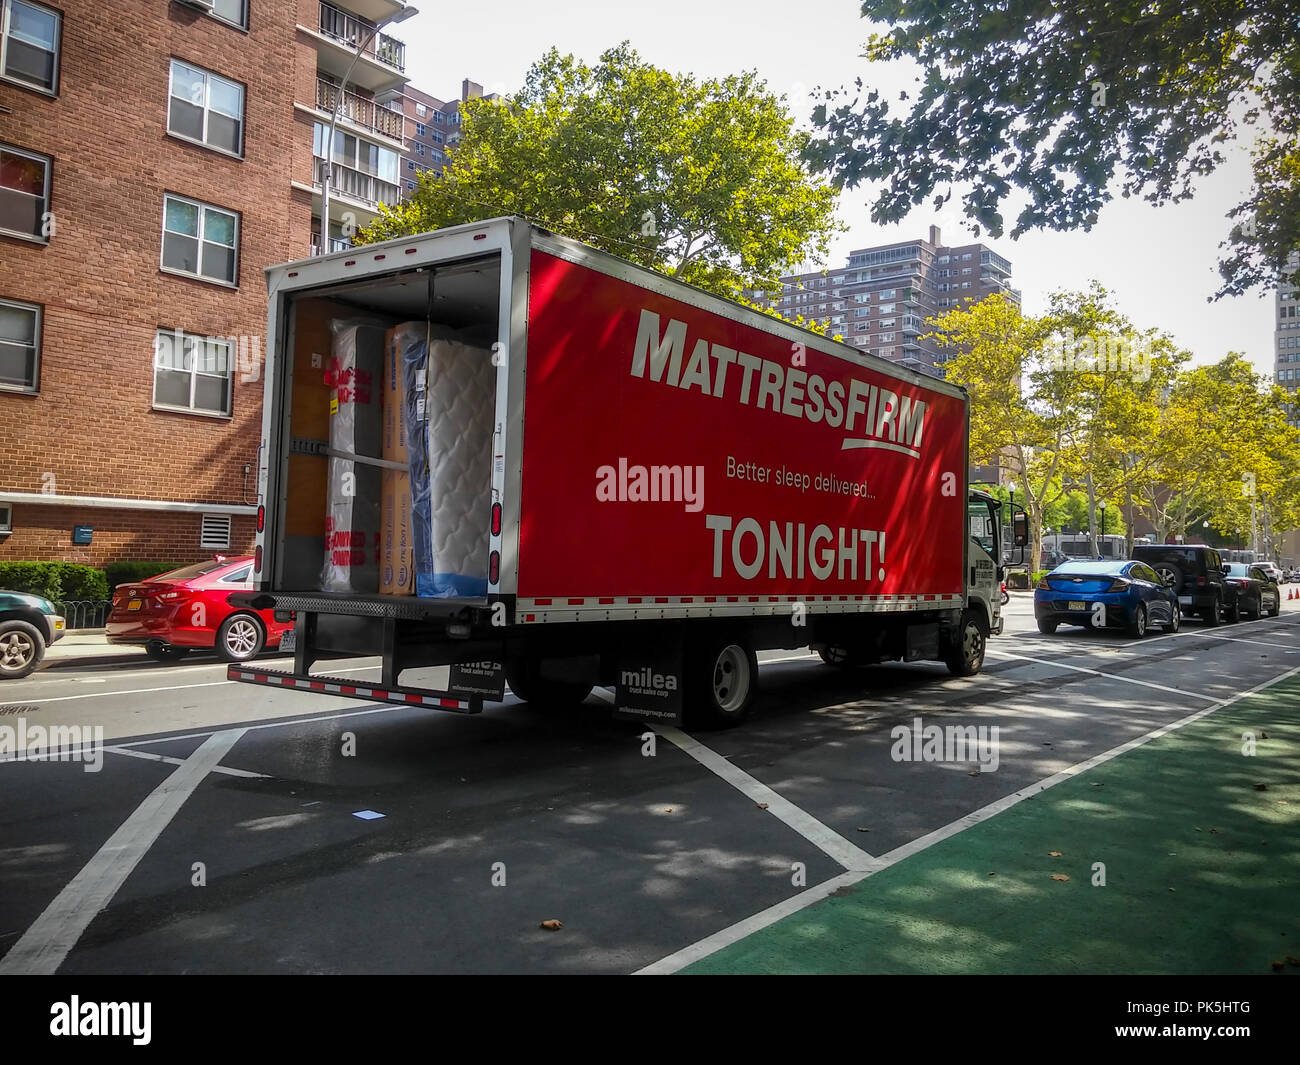 A Mattress Firm Turck Making Deliveries In The Chelsea Neighborhood Of New York On Sunday September 2 2018 Tempur Sealy International Is Suing Mattress Firm Over The Retailer Selling Copycat Mattresses That